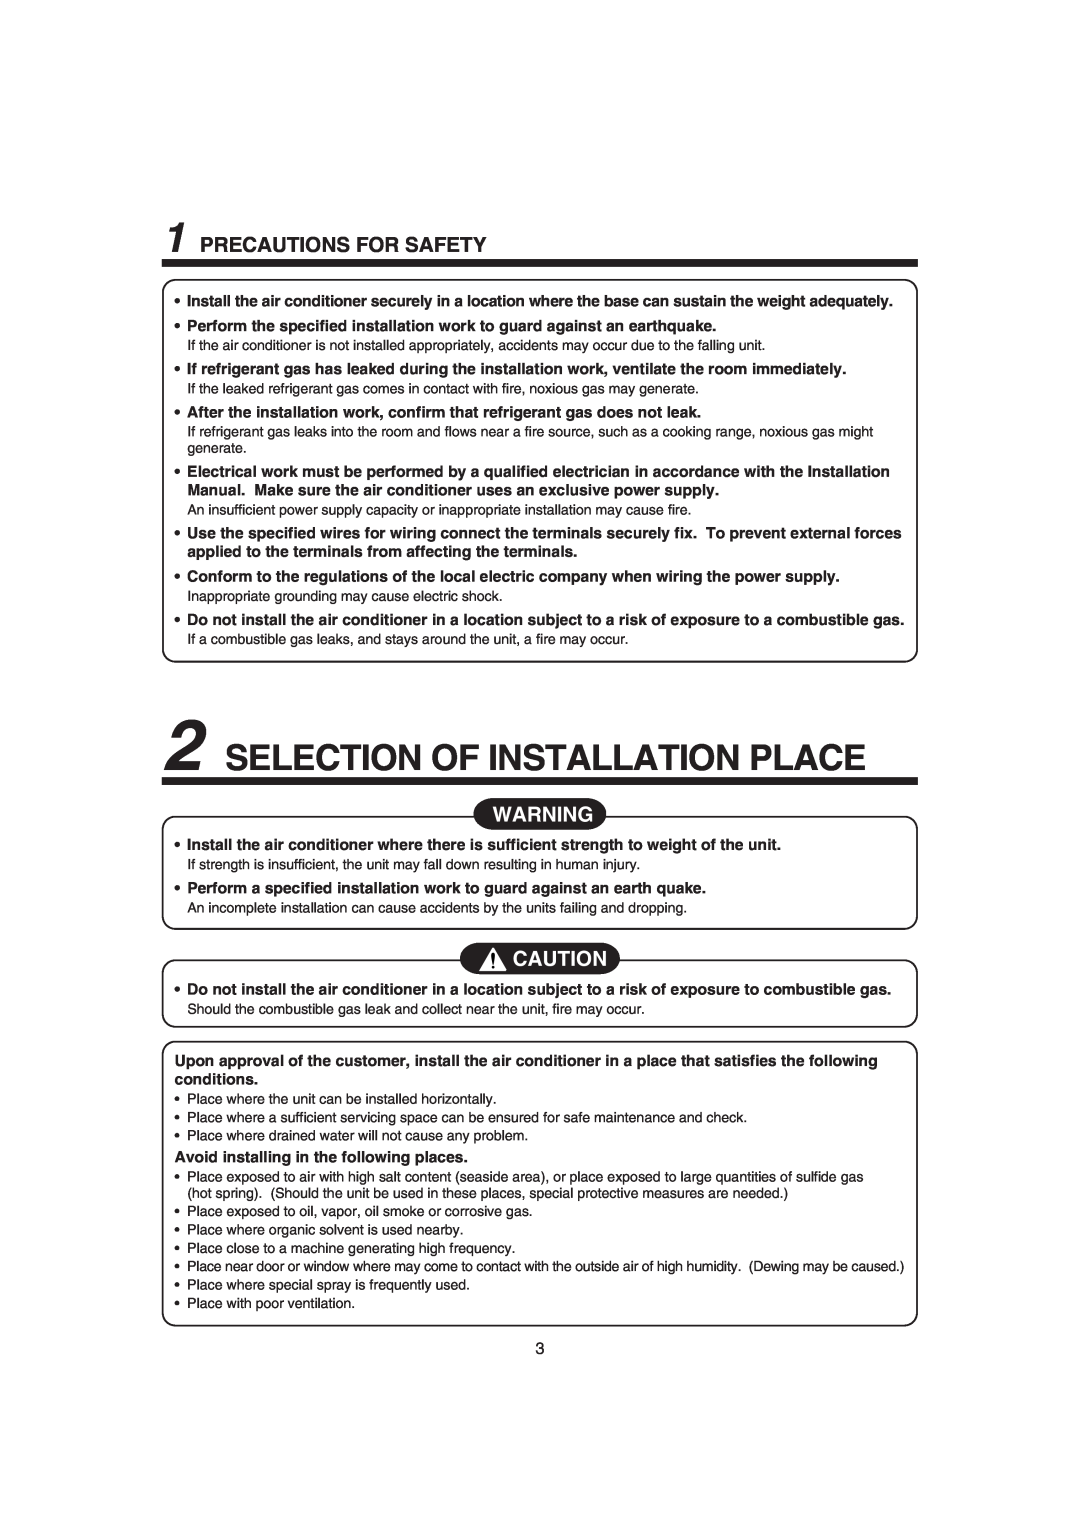 Pentax MMK-AP0121H Selection Of Installation Place, Precautions For Safety, Avoid installing in the following places 